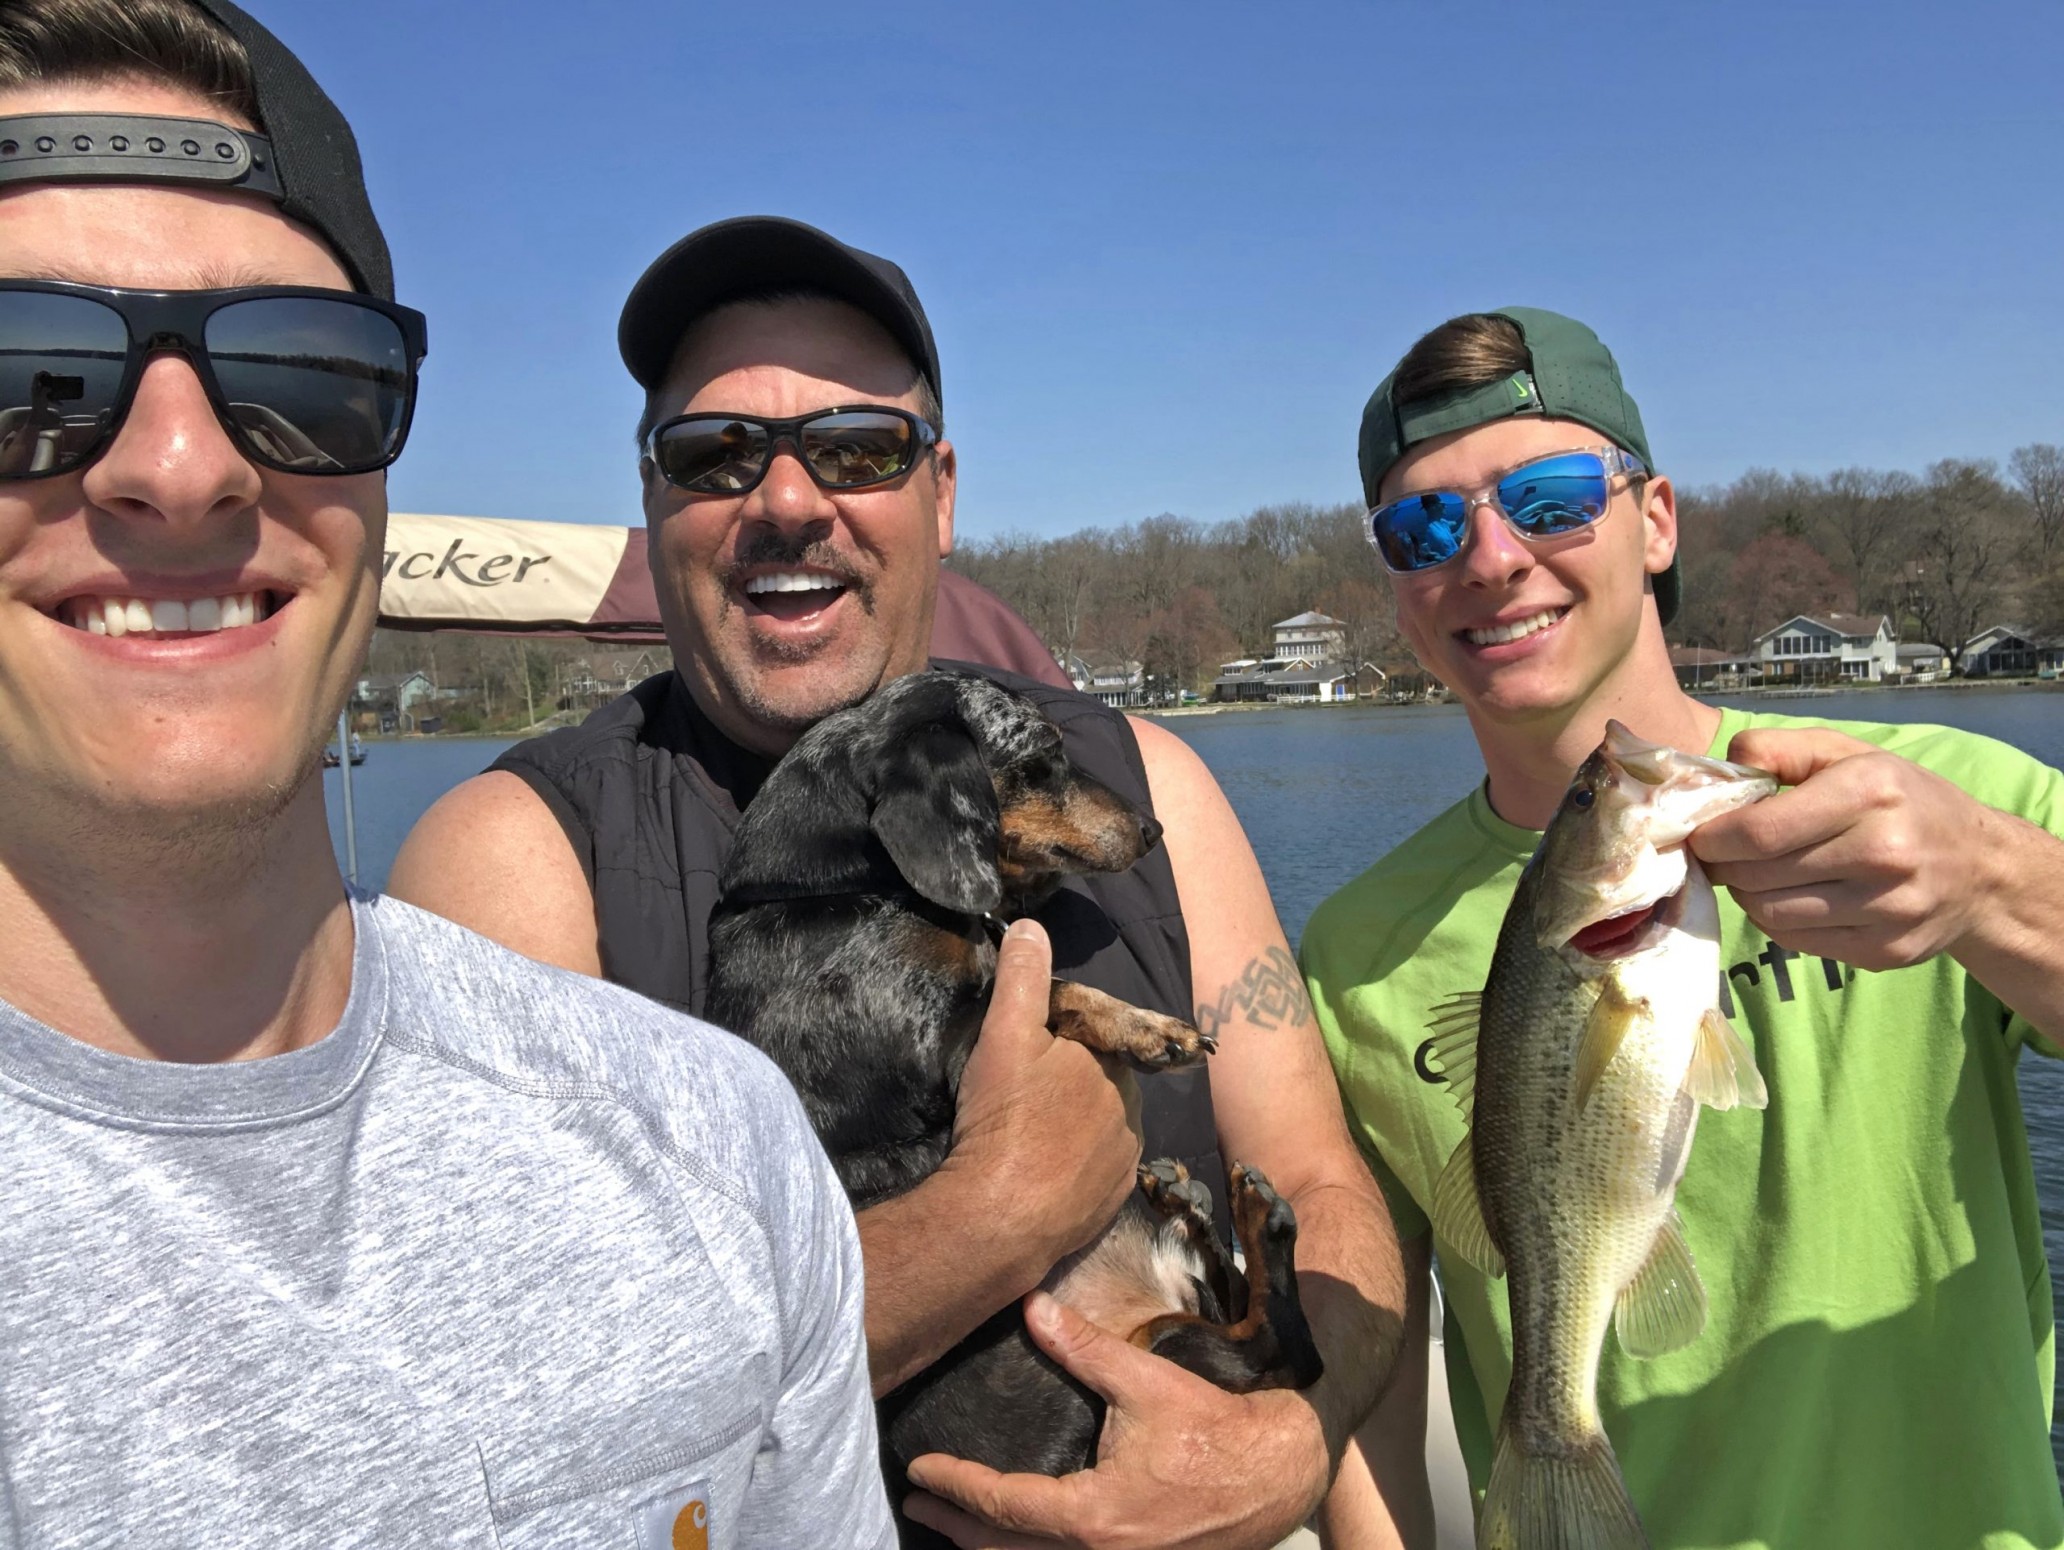 AnglersChannel – Page 83 – Anglers Channel